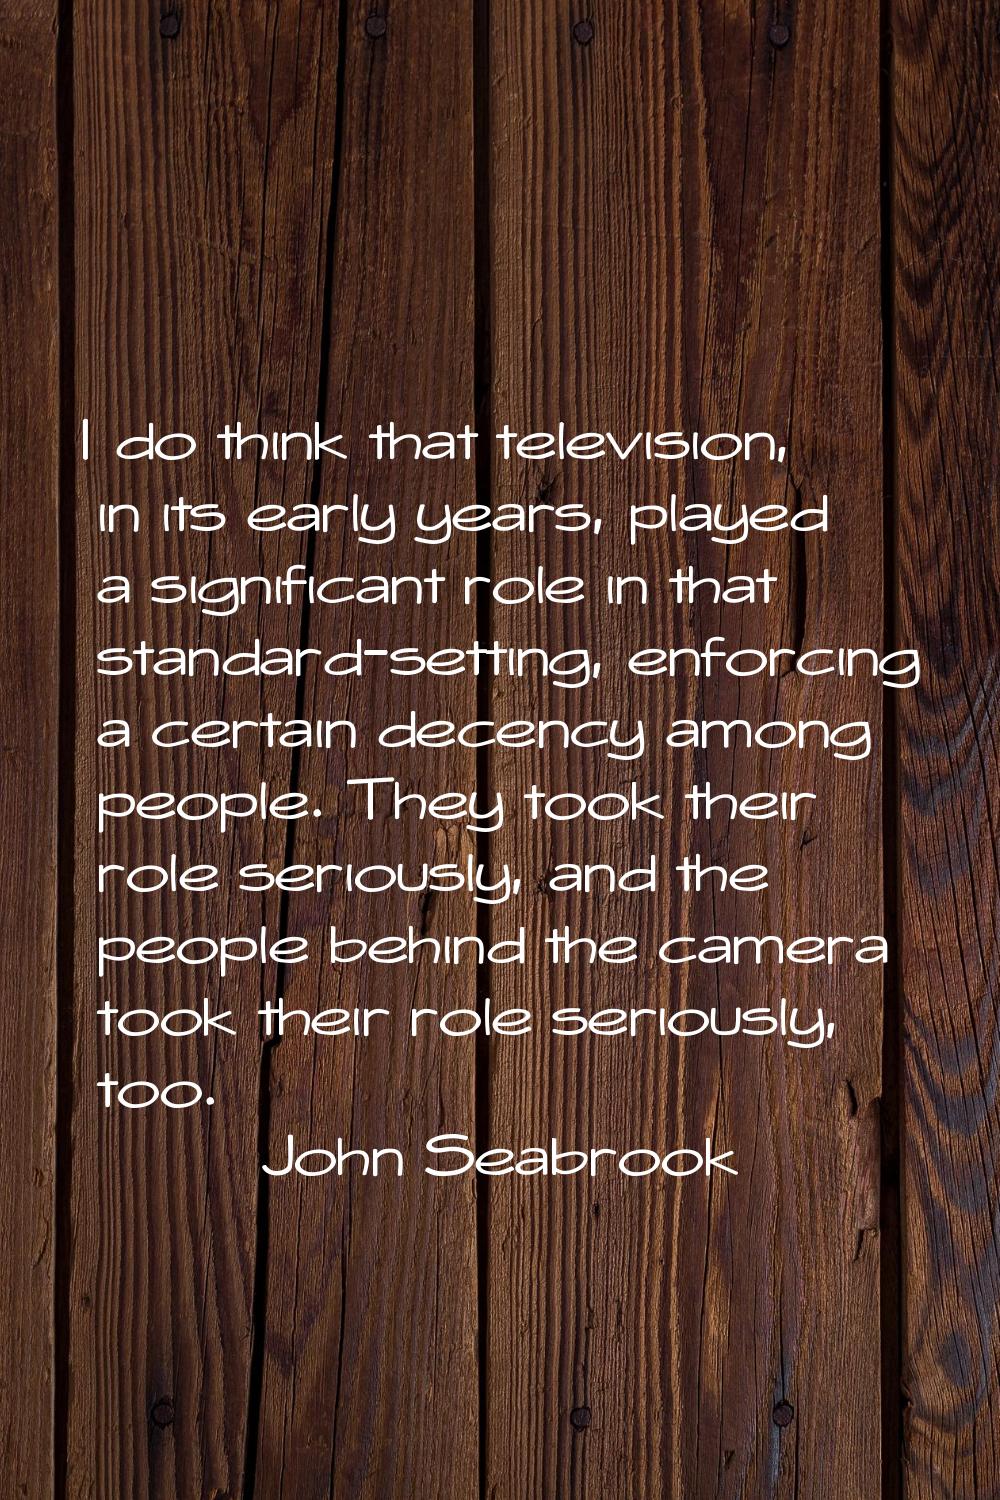 I do think that television, in its early years, played a significant role in that standard-setting,